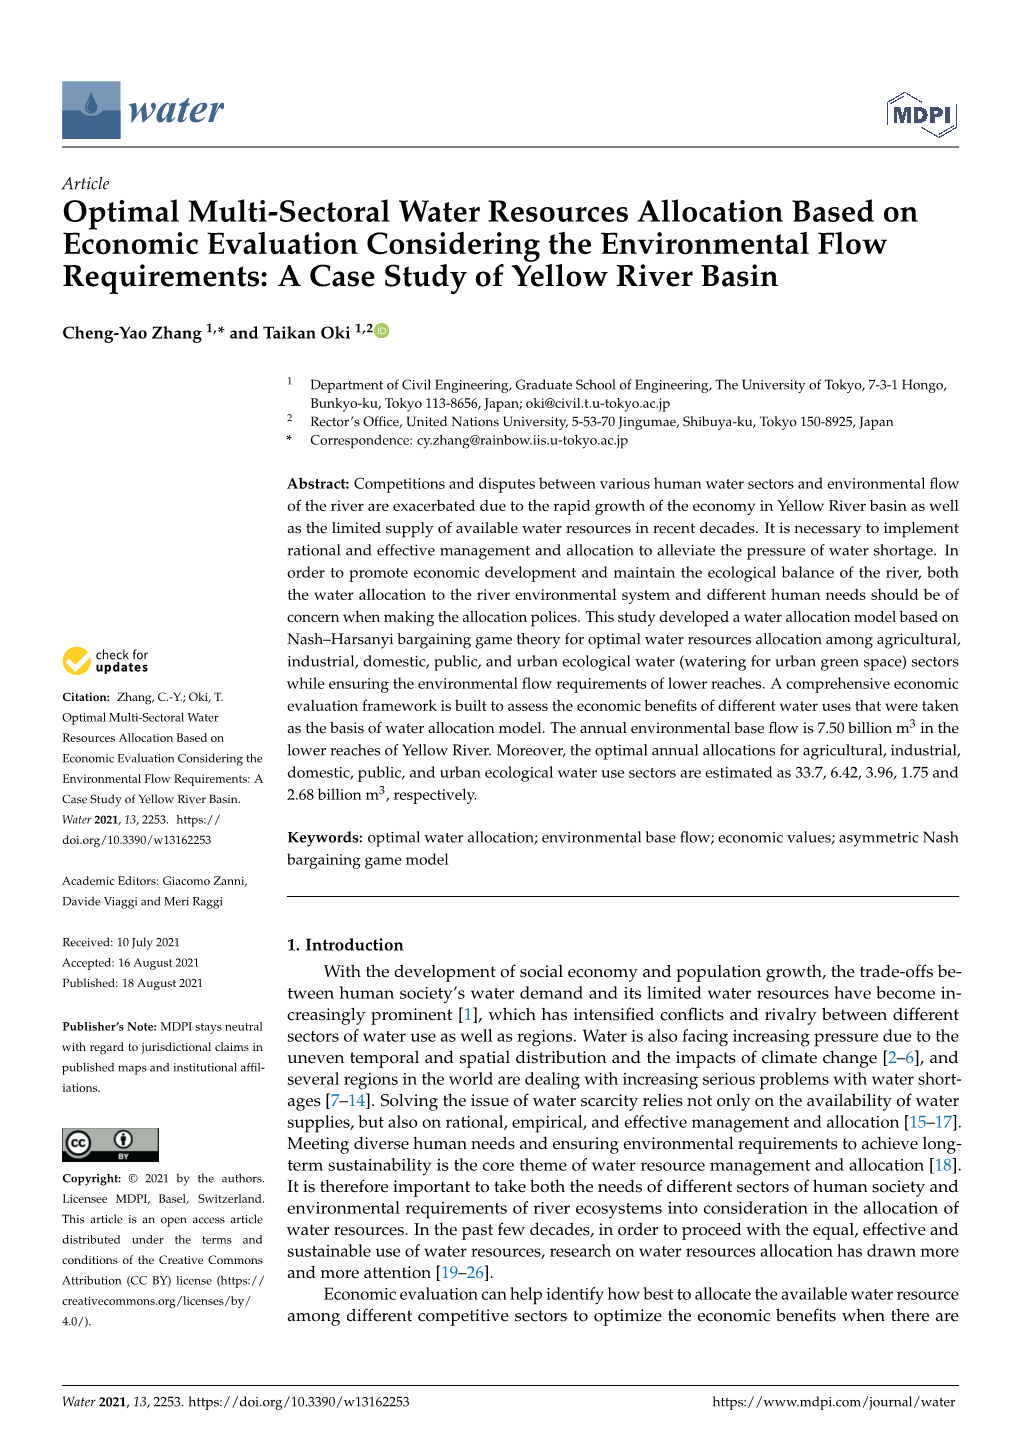 Optimal Multi-Sectoral Water Resources Allocation Based on Economic Evaluation Considering the Environmental Flow Requirements: a Case Study of Yellow River Basin